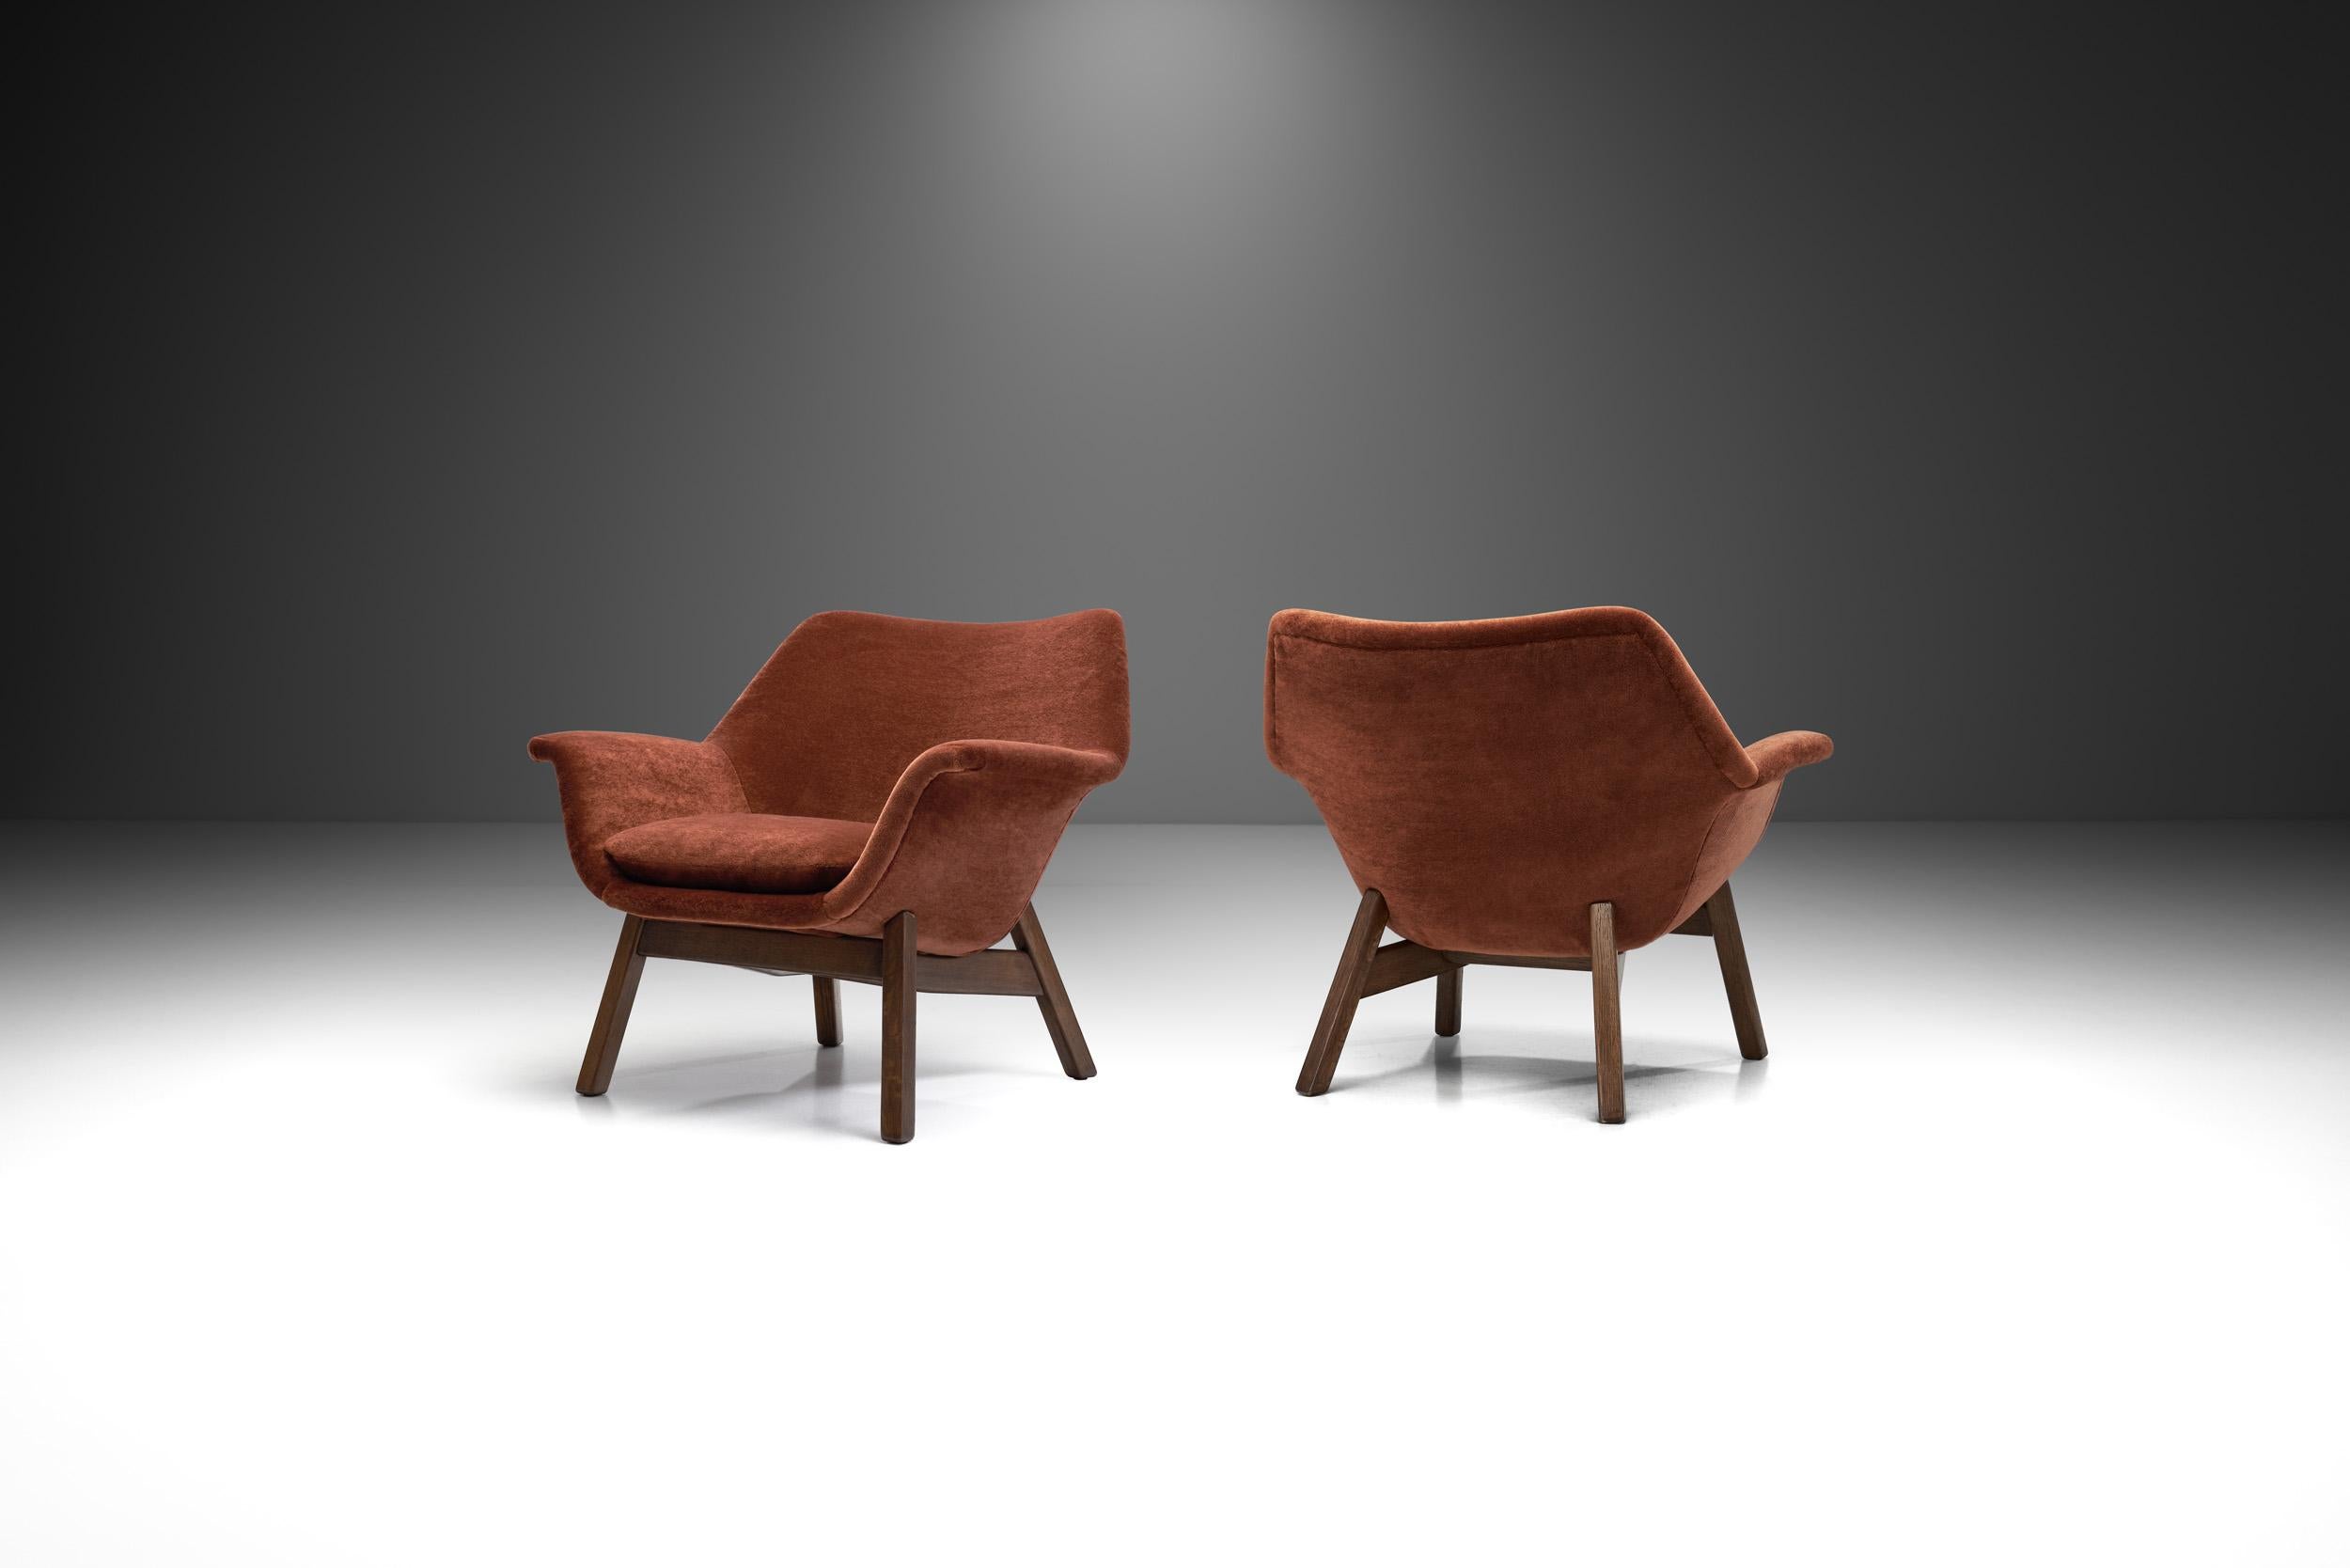 This pair of rare oak easy chairs showcases the homely curviness that defined the design of the 1950s in the Nordic countries. Hiort af Ornäs developed the model for his own furniture company, ‘Hiort Tuote Valmistaja Puunveisto Helsinki’, or ‘Hiort